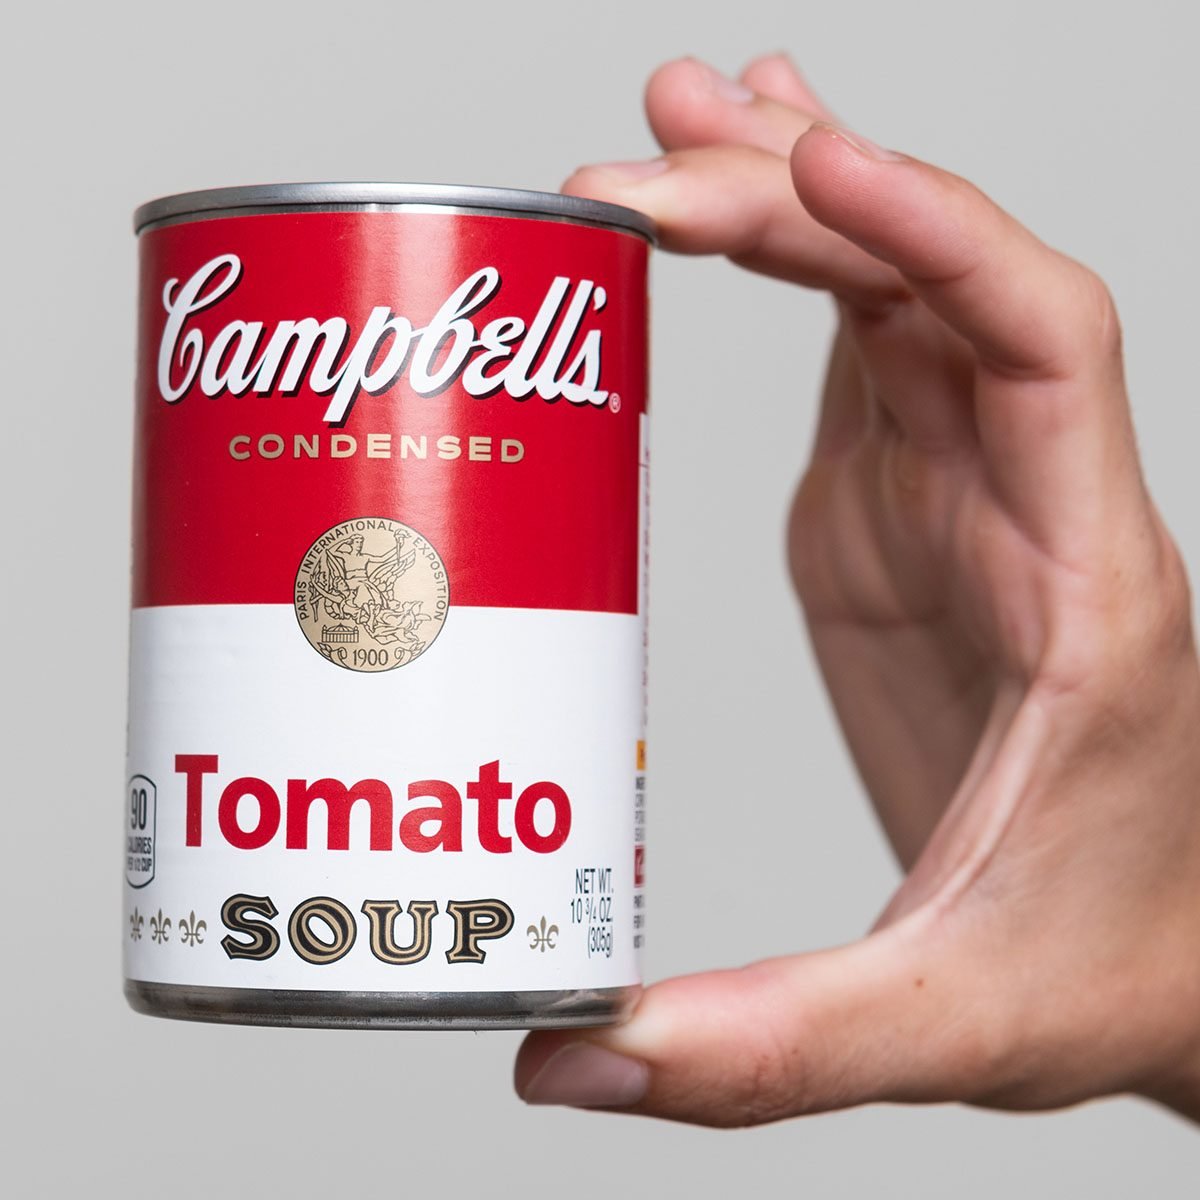 Human hand holding a tin can of Campbell's Soup tomato soup on gray background